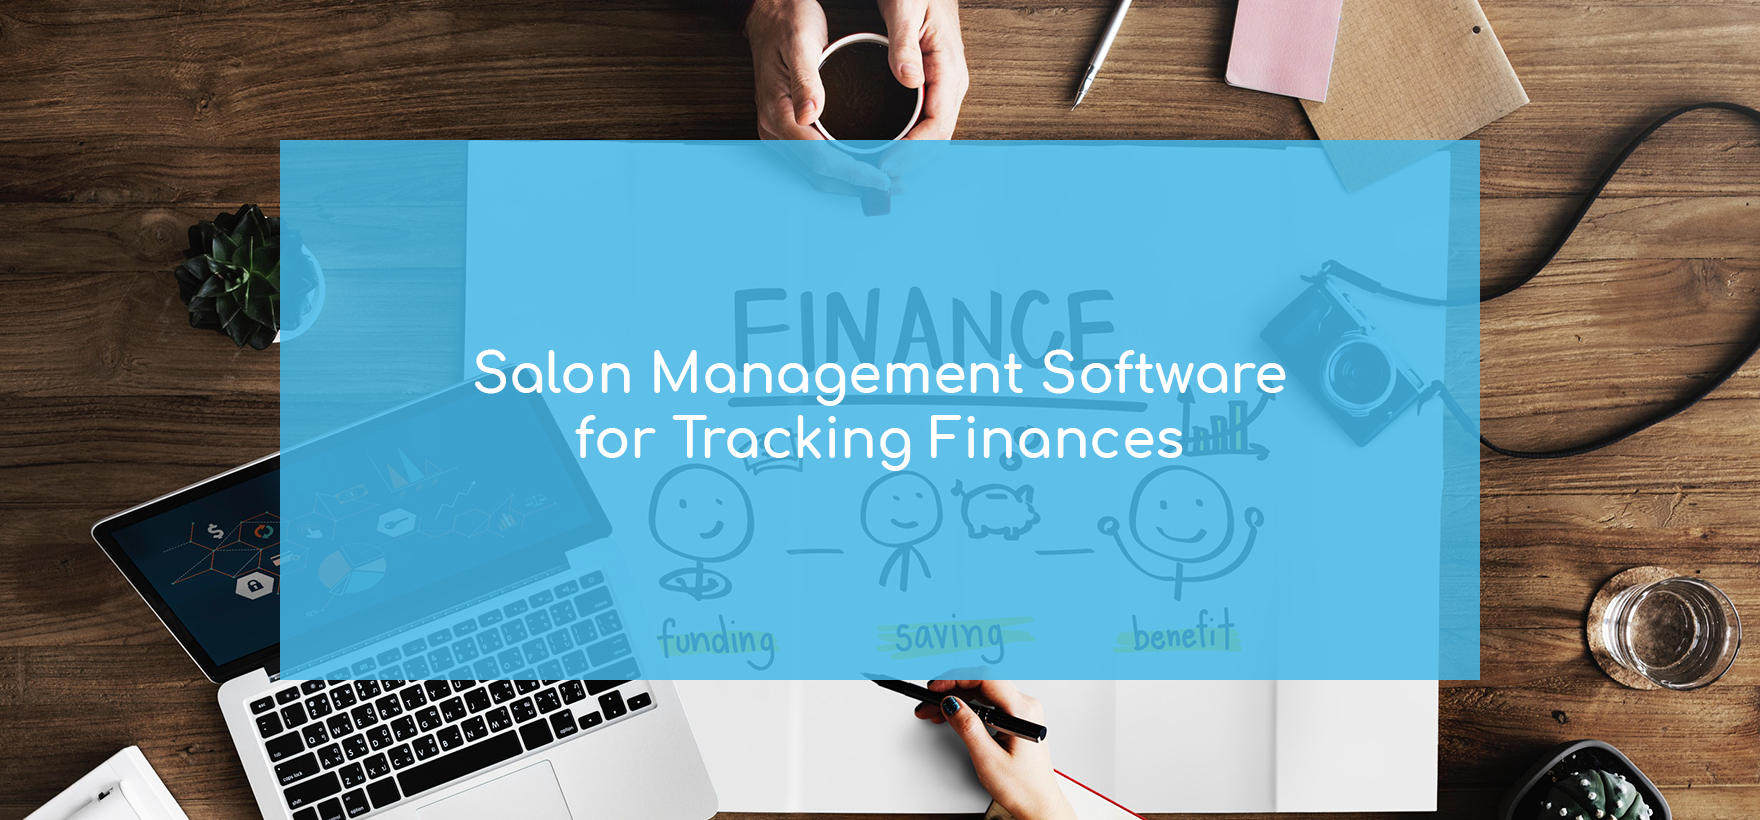 Beauty salon accounting. Smarter Beauty Business Accounting with Salon Management Software